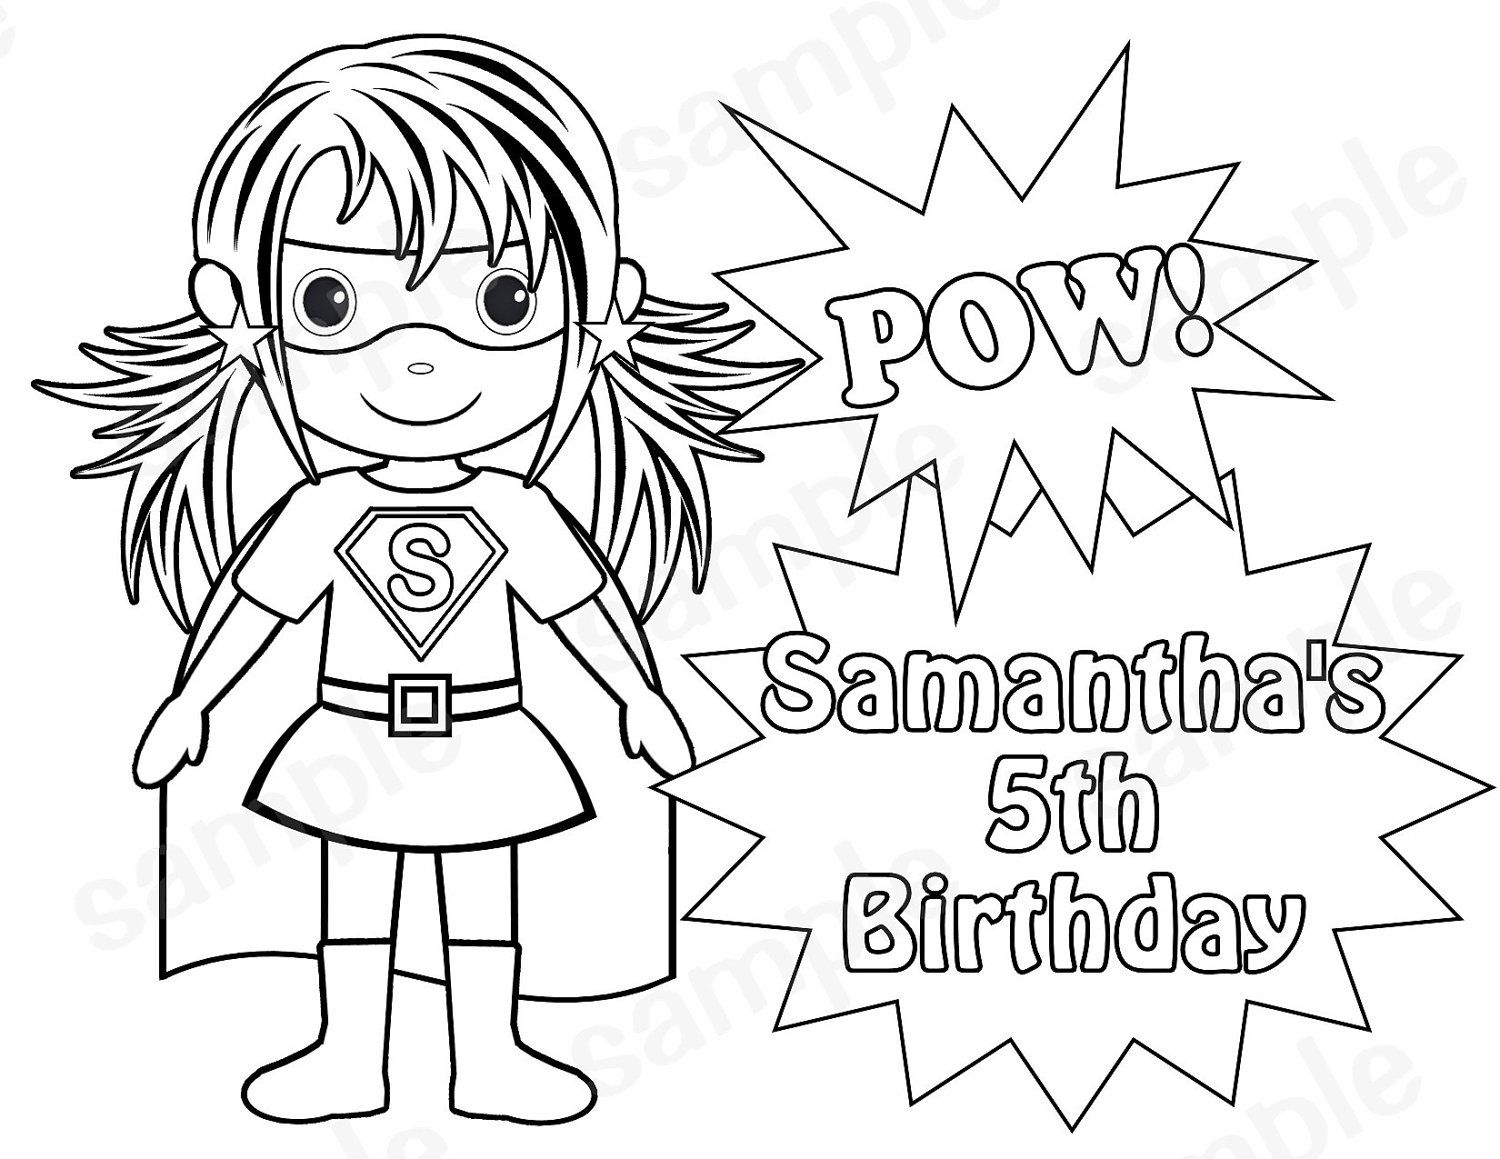 Free Coloring Pages Of Superheroes Printables Download Free Coloring Pages Of Superheroes Printables Png Images Free Cliparts On Clipart Library